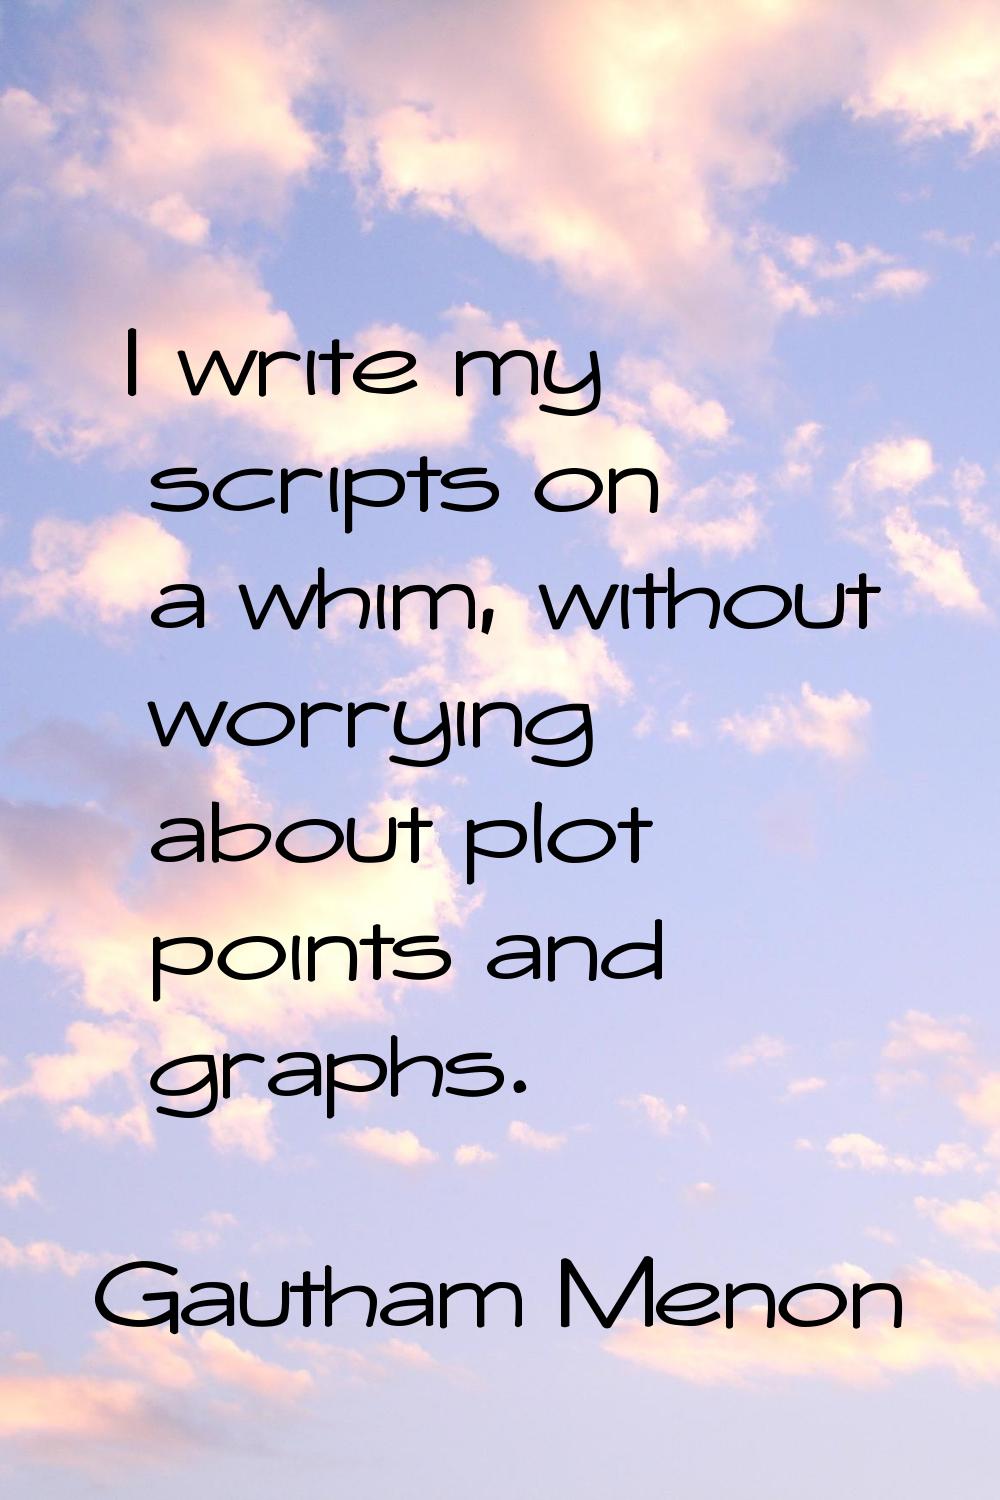 I write my scripts on a whim, without worrying about plot points and graphs.